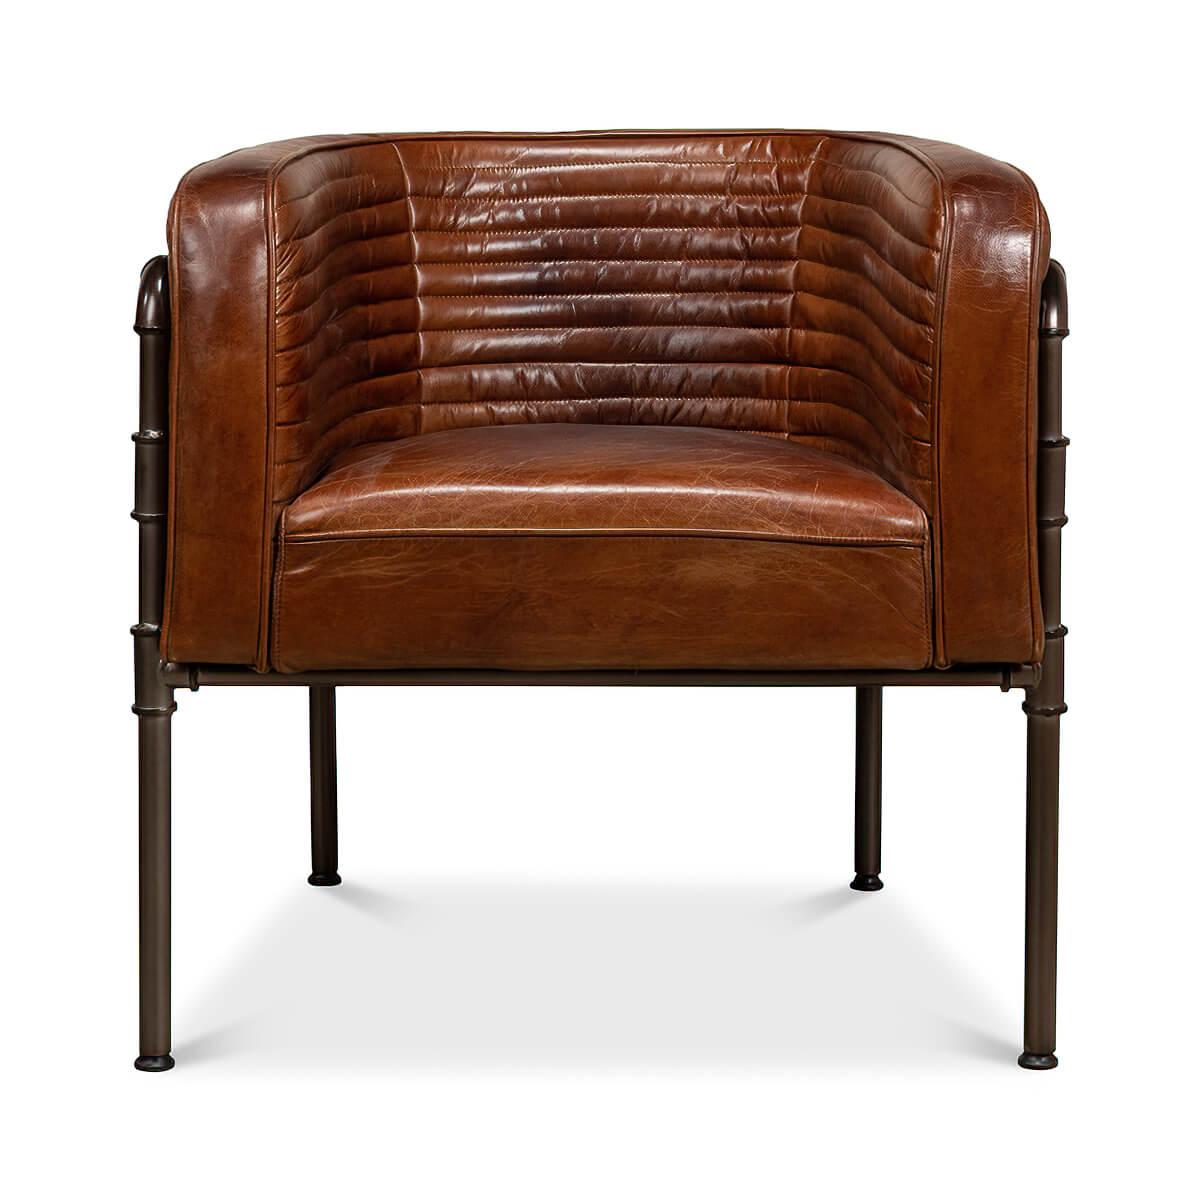 Industrial Modern metal and brown leather armchair with an industrial-style design. Dark brown leather with ribbed detailing wraps around the interior back and sides of the chair which sits on a 